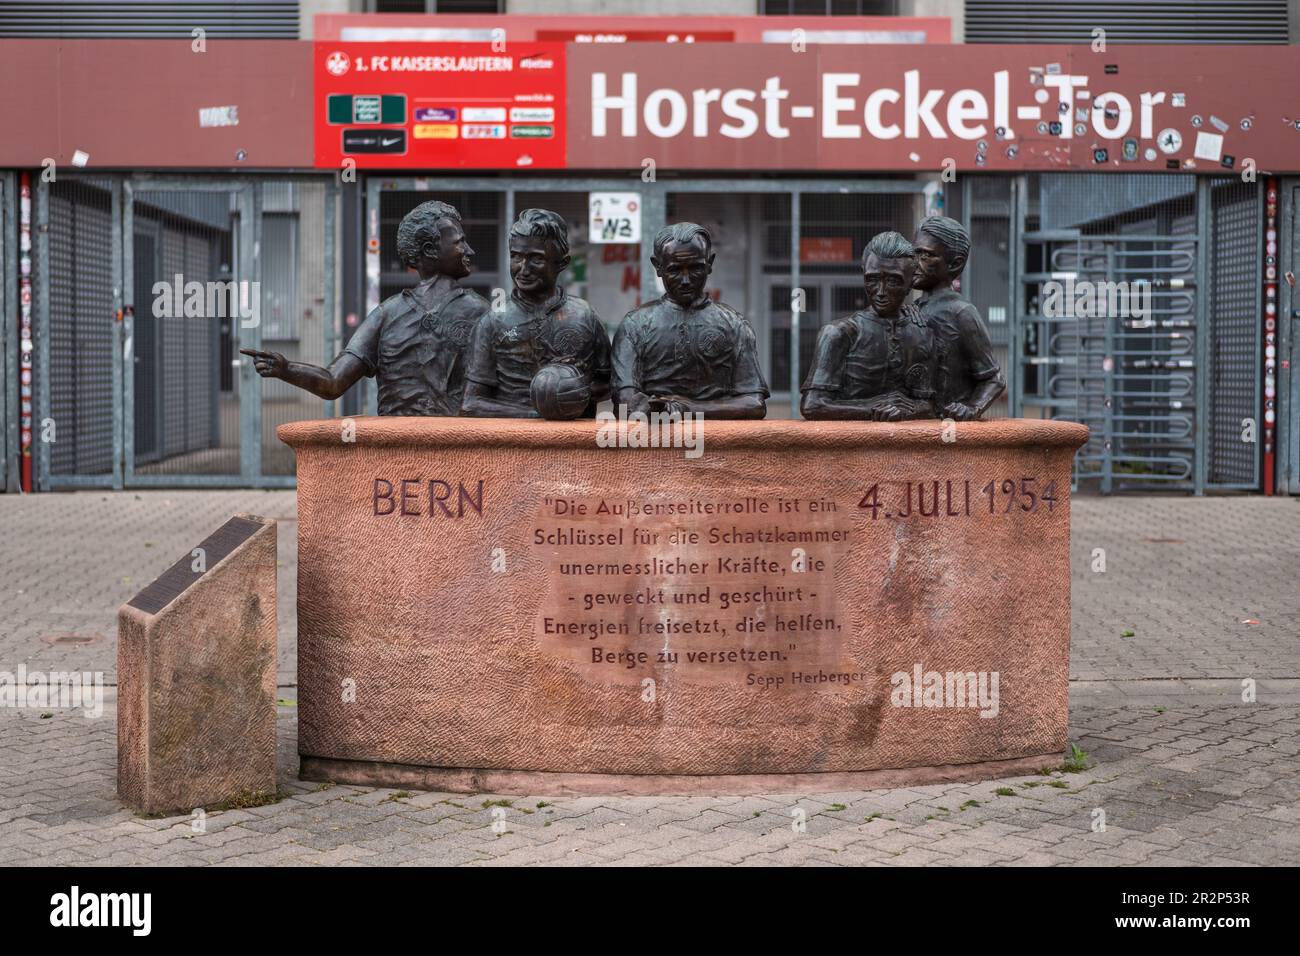 Kaiserslautern, Germany. 20th May, 2023. Football player statues in front of the Fritz-Walter stadium. Additional attraction for attendees of the Street Food Festival, on the way from, or to the event. The event takes place over two days on Saturday and Sunday. Street Food Festivals have been organized since 2014 in more than 25 cities of Germany. The idea behind is to prepare and cook international food specialities live in one place. Credit: Gustav Zygmund/Alamy News Stock Photo